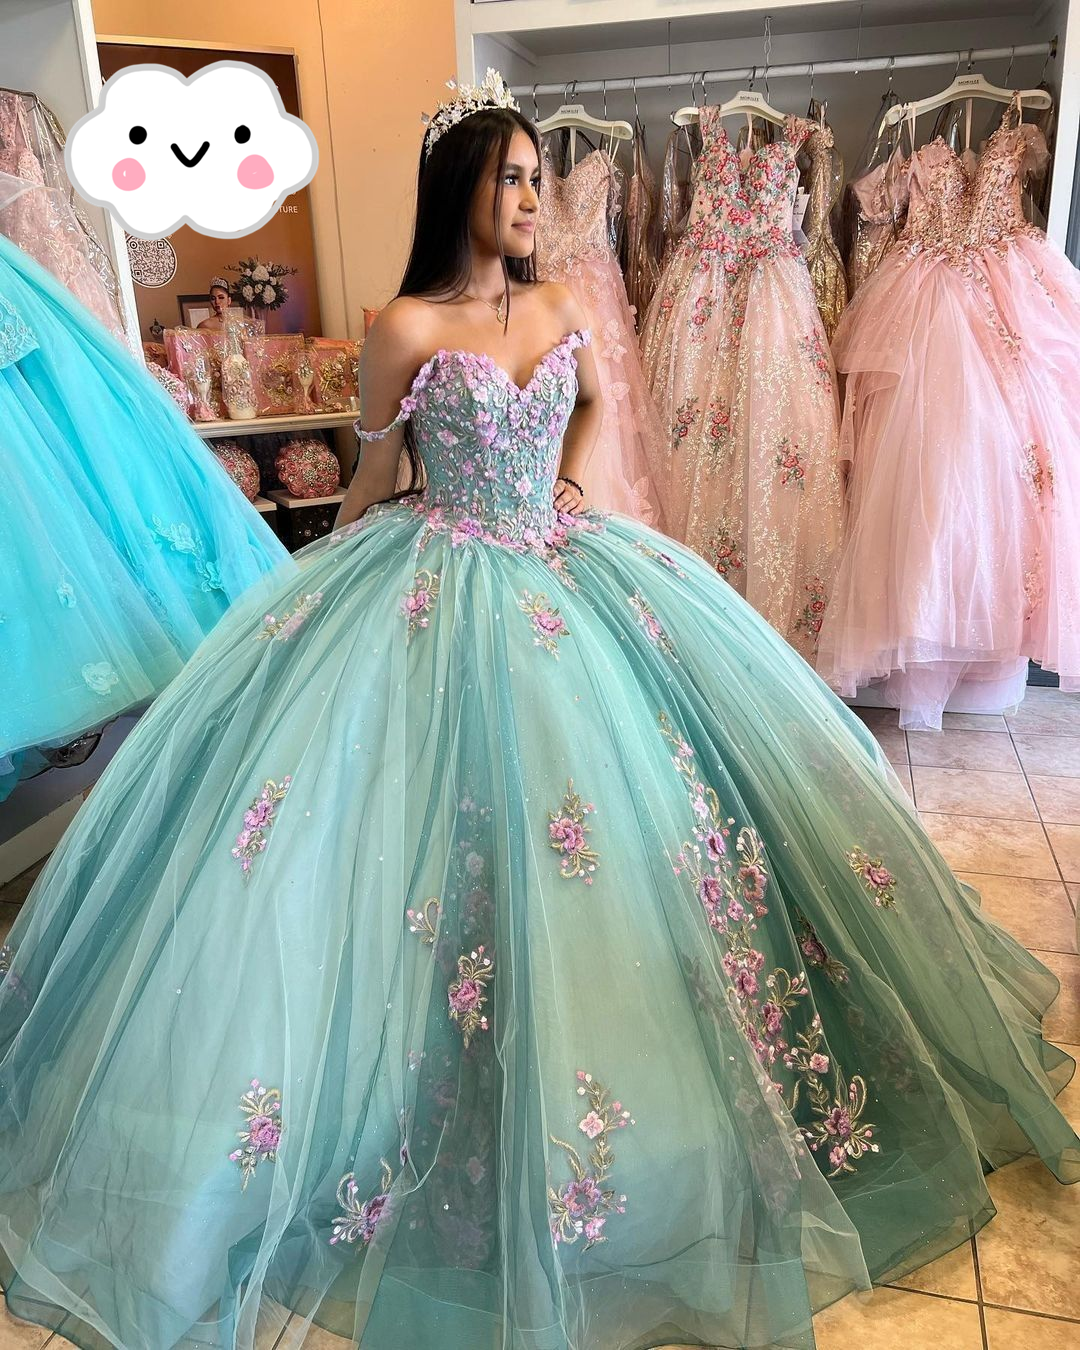 Lake Blue Princess Ball Gown 3D Flowers Quinceanera Dresses Off Shoulder Appliques Beaded Maxi Sweet 16 Dress Y2632